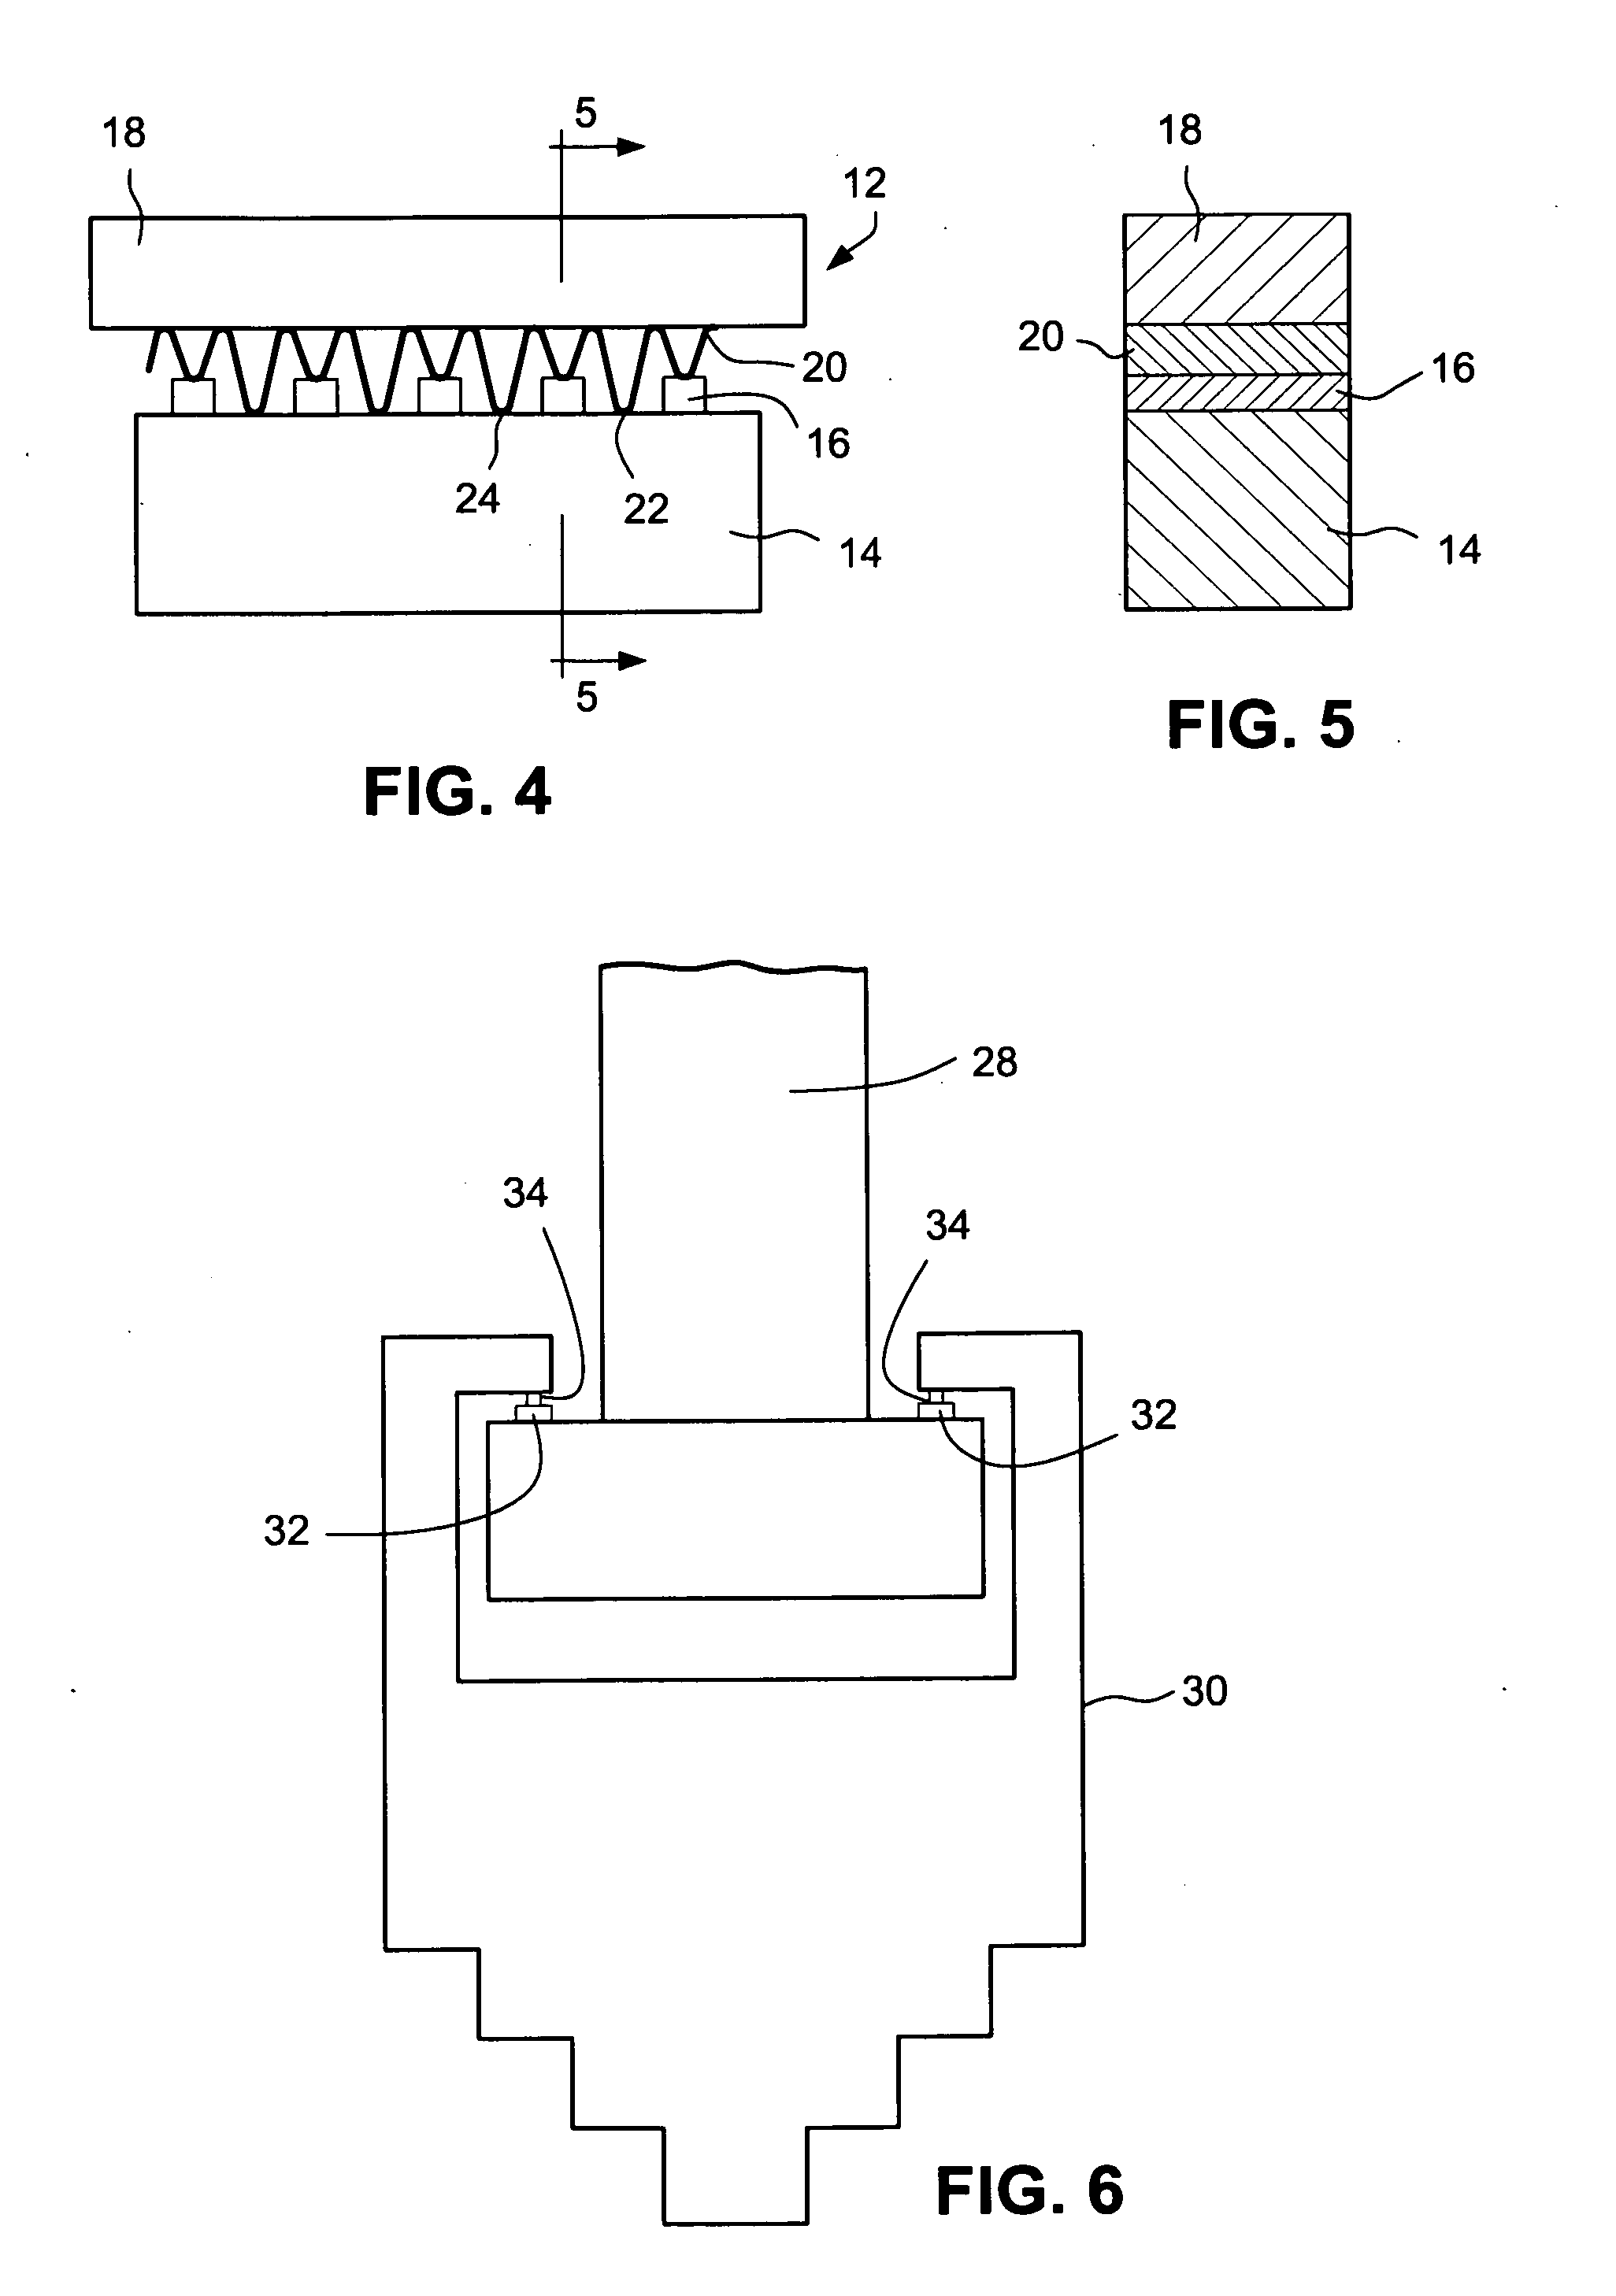 Plating of ceramic matrix composite parts as joining method in gas turbine hardware